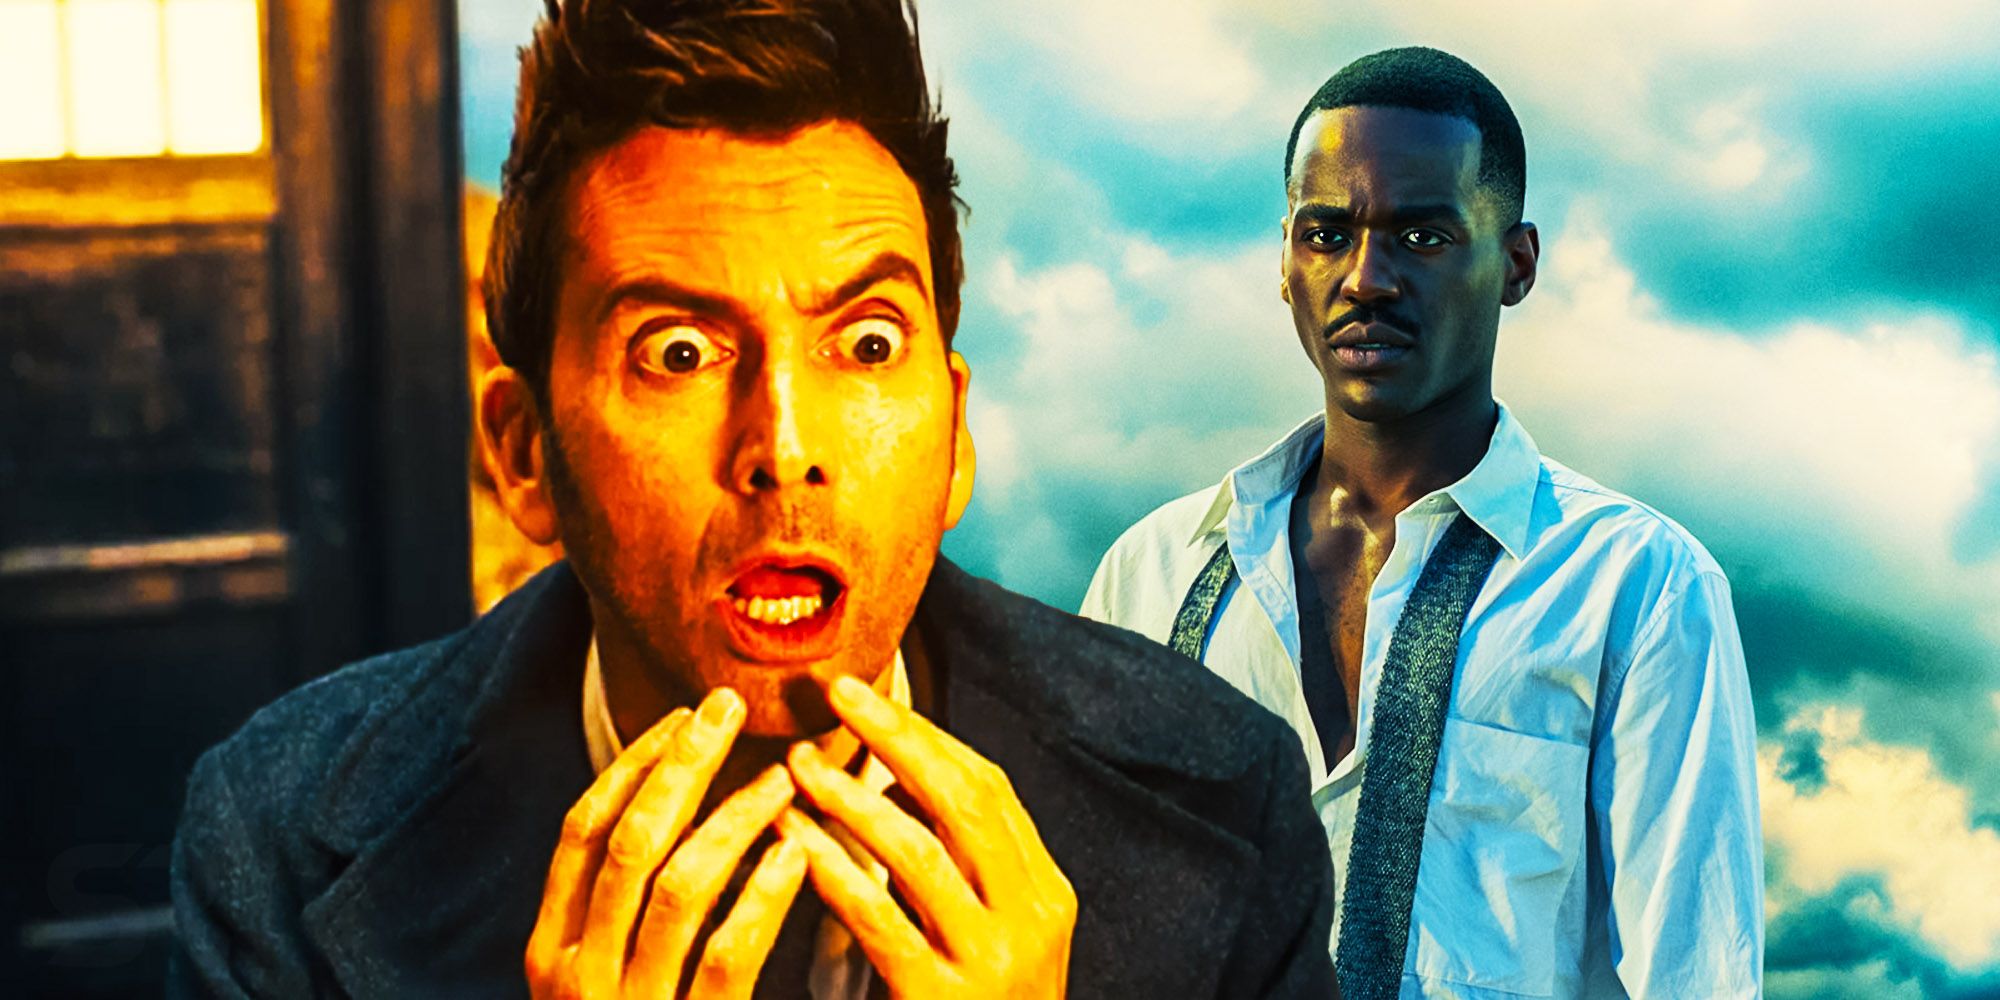 A mixed bag of David Tennant's Doctor looking shocked and Nkuti just looking blank in Doctor Who